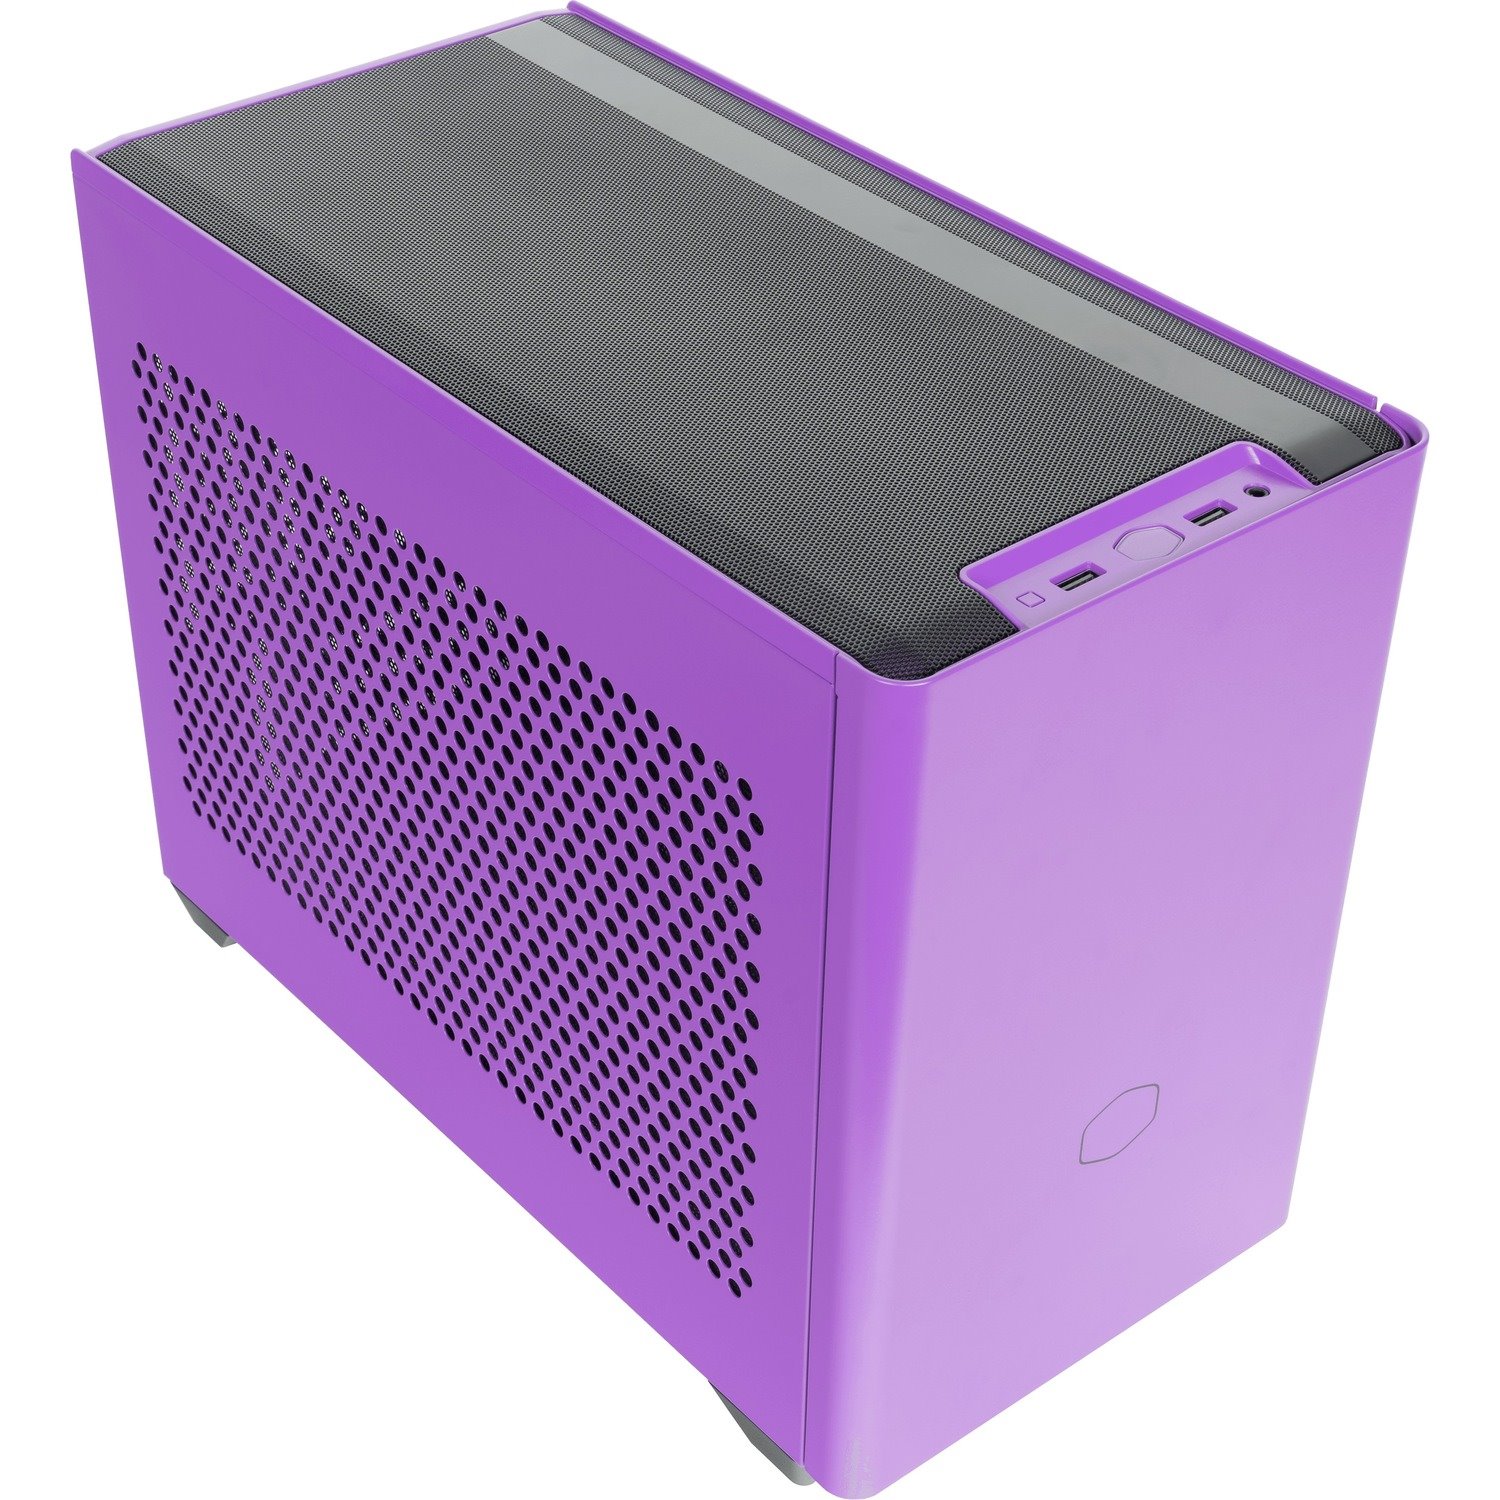 Cooler Master MasterBox MCB-NR200P-PCNN-S00 Computer Case - Mini ITX, Mini DTX Motherboard Supported - Tempered Glass, Mesh, Plastic, Steel - NightShade Purple